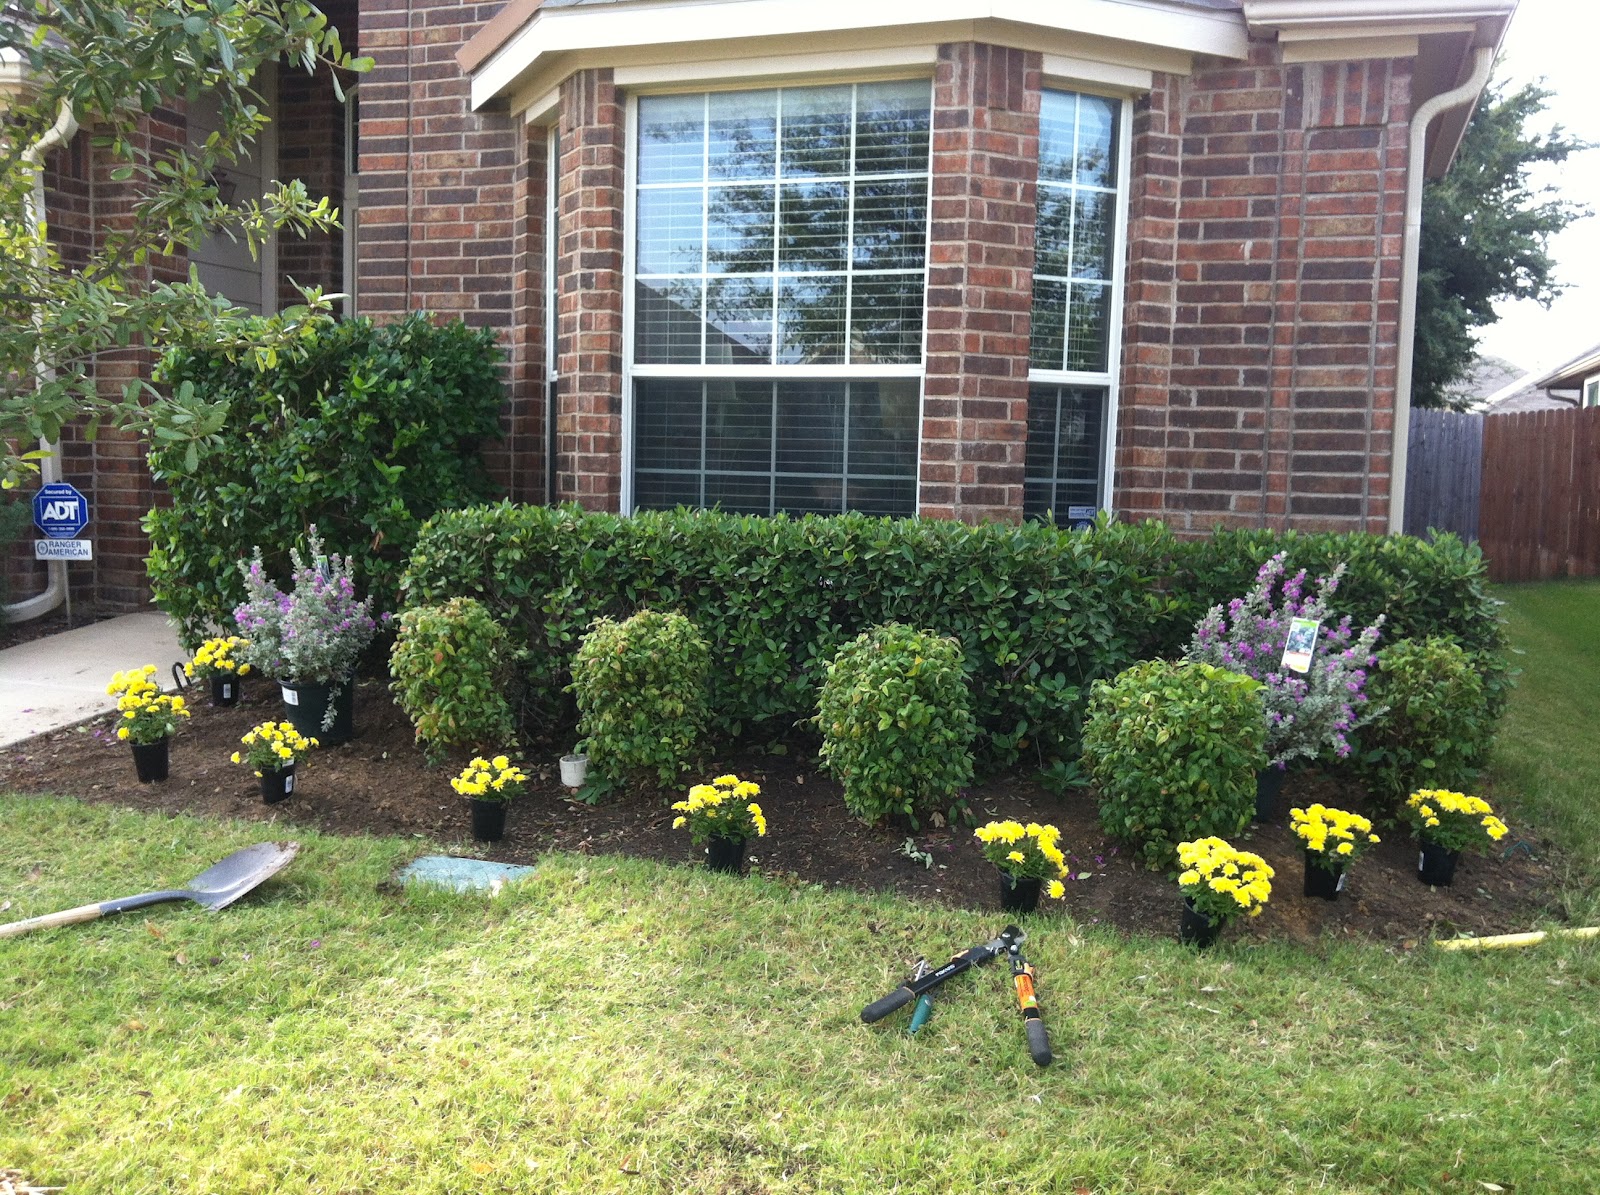 The Traylor Parks Blog: Front Yard Landscaping